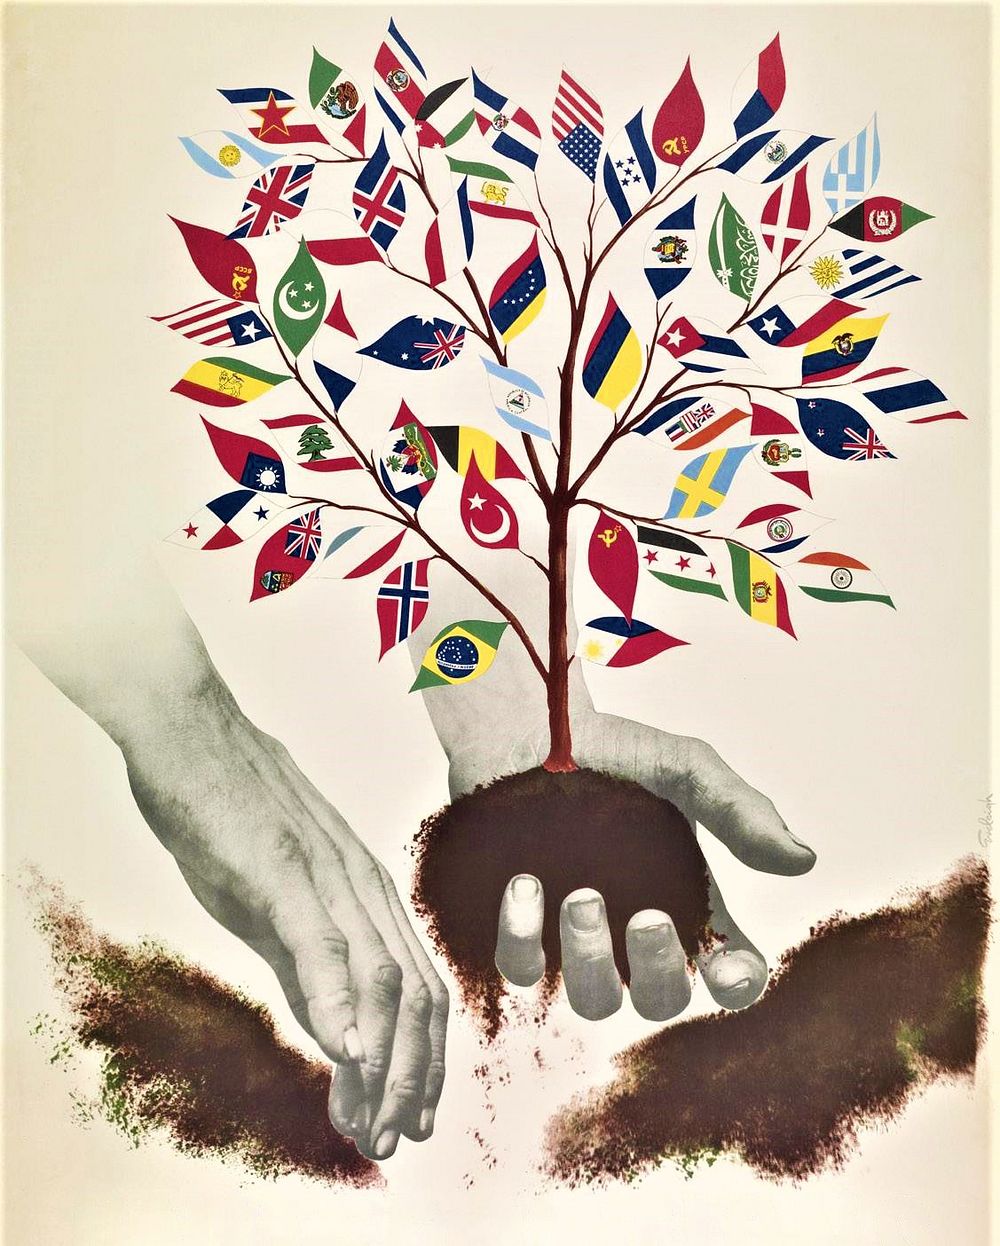 Poster by Henry Eveleigh - United Nations« In 1947, Henry Eveleigh won first prize at an international poster contest…